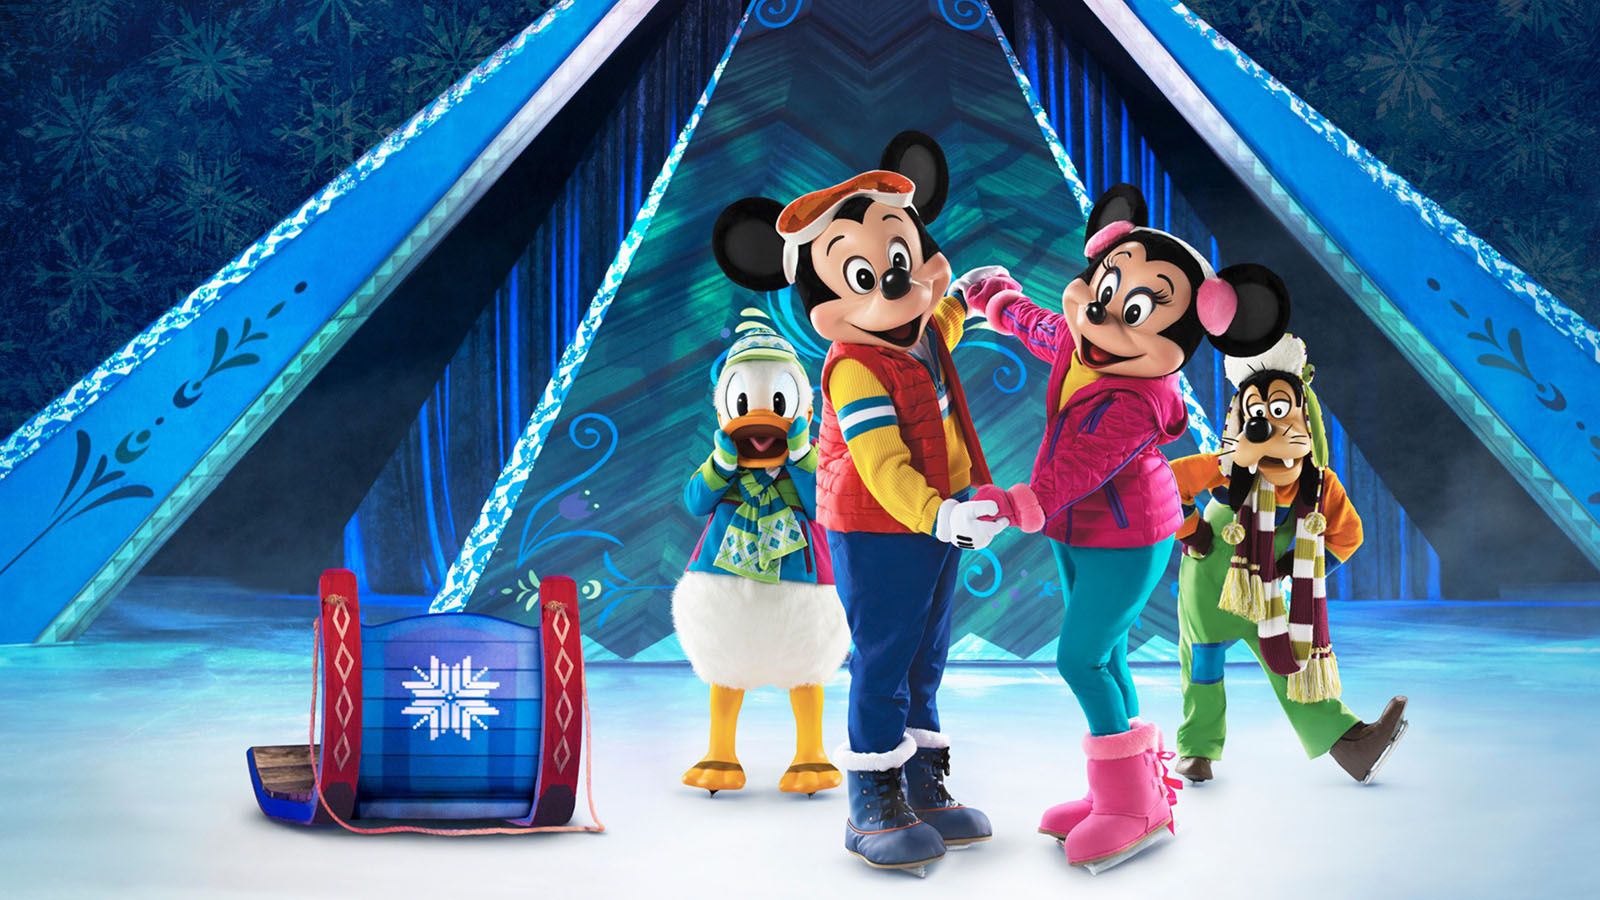 Disney on Ice will be at Memorial Coliseum from Feb. 23-26.